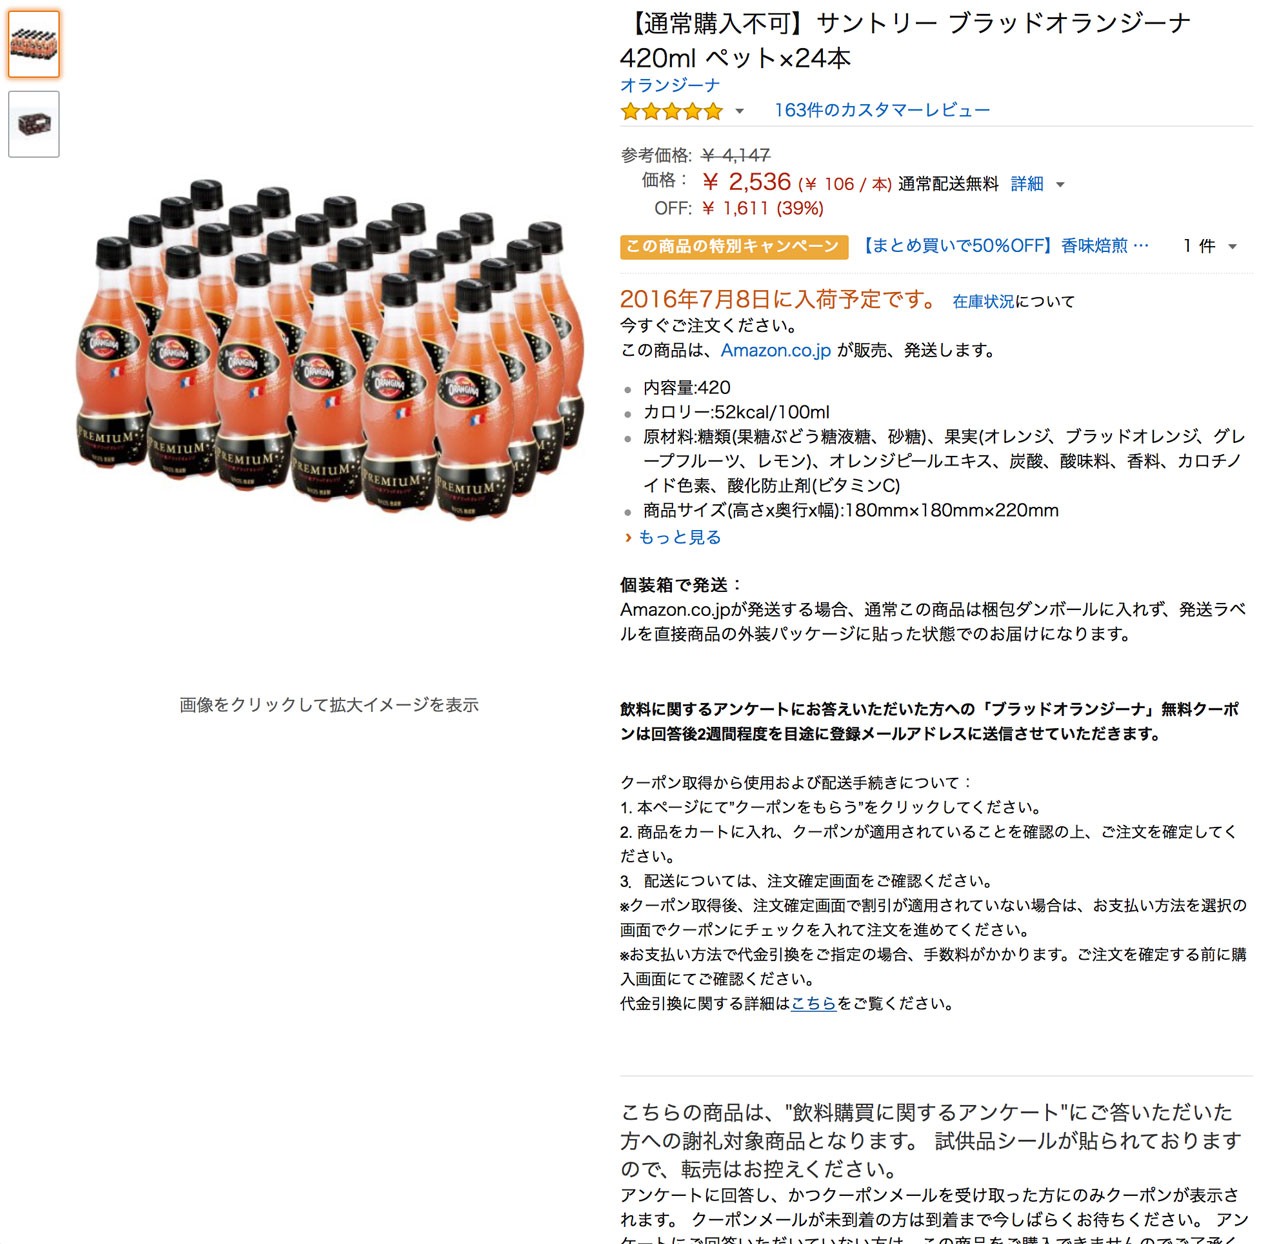 Amazon-questionnaire-drink-page